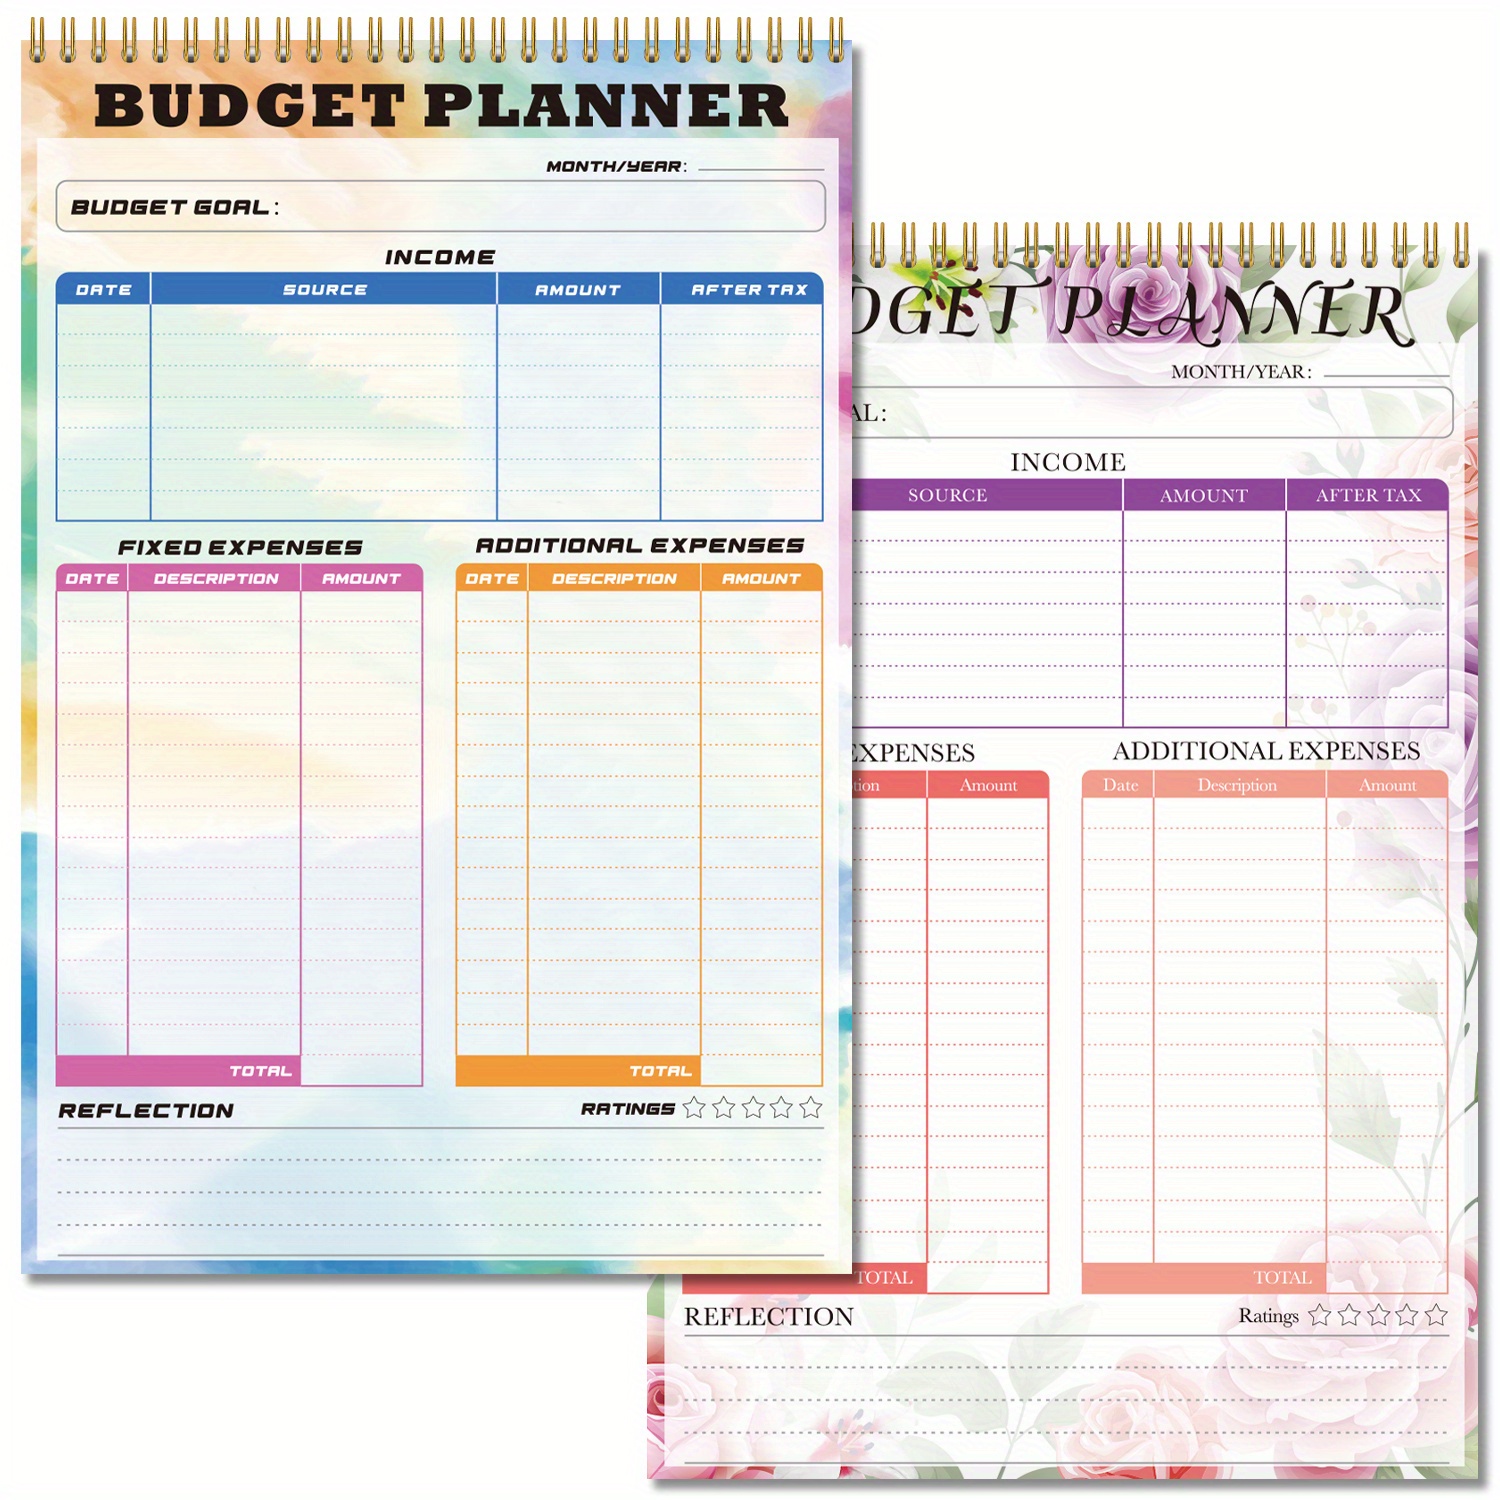 Cofest Planner Weekly Planner Monthly Planner,Undated Budget and Ledger,Financial Planning Log,Goal Recording Notebook,Planner for Home Office A6 Size